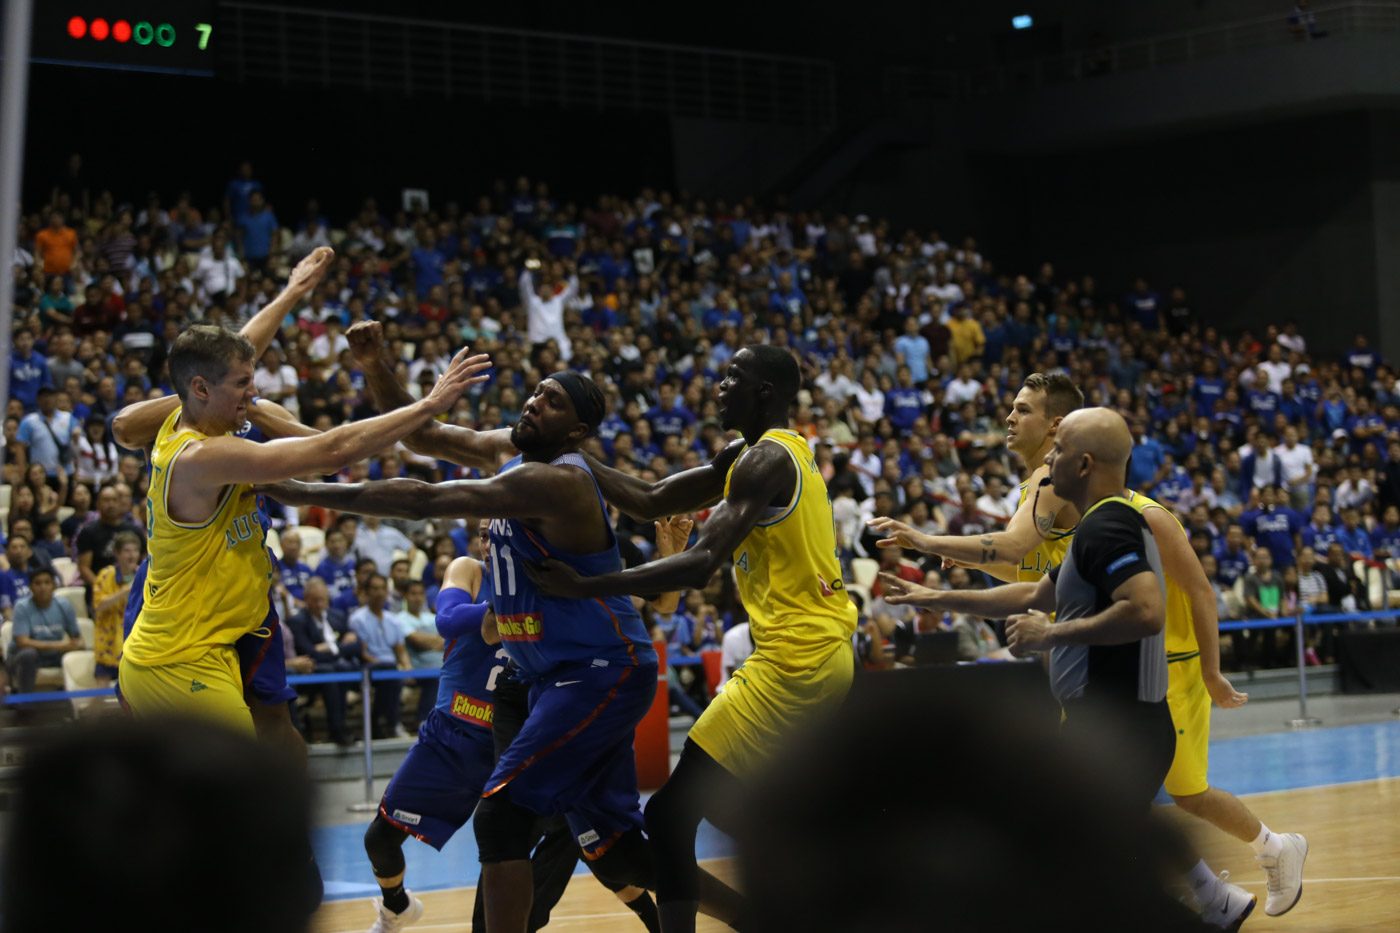 Bulacan Sapakan: How it went from bad to worse for Gilas